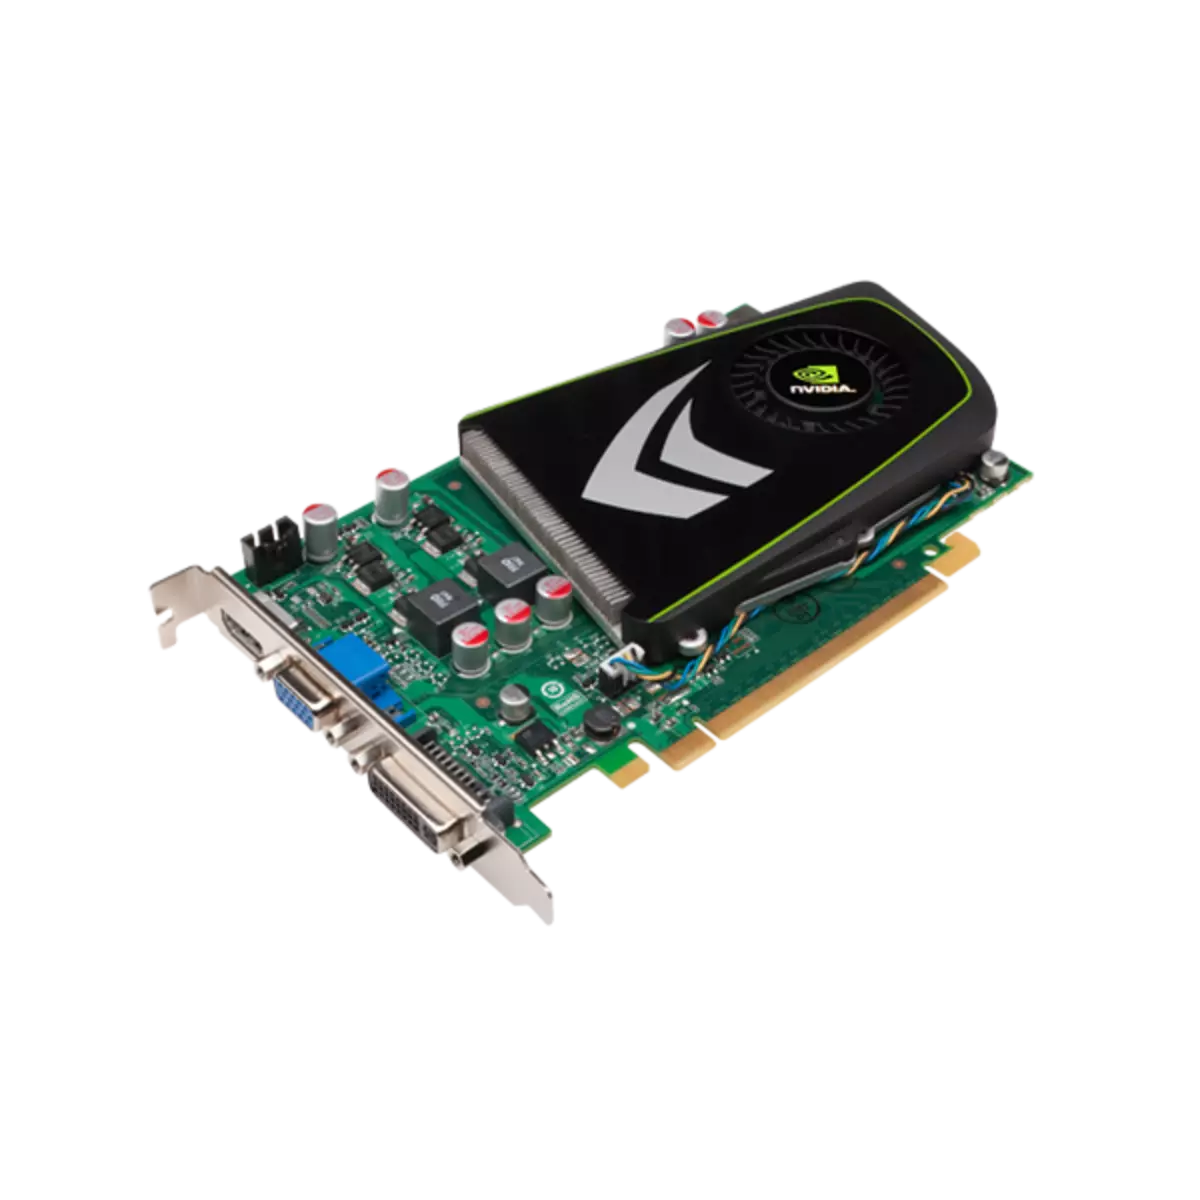 Download drivers for NVIDIA GeForce GT 240